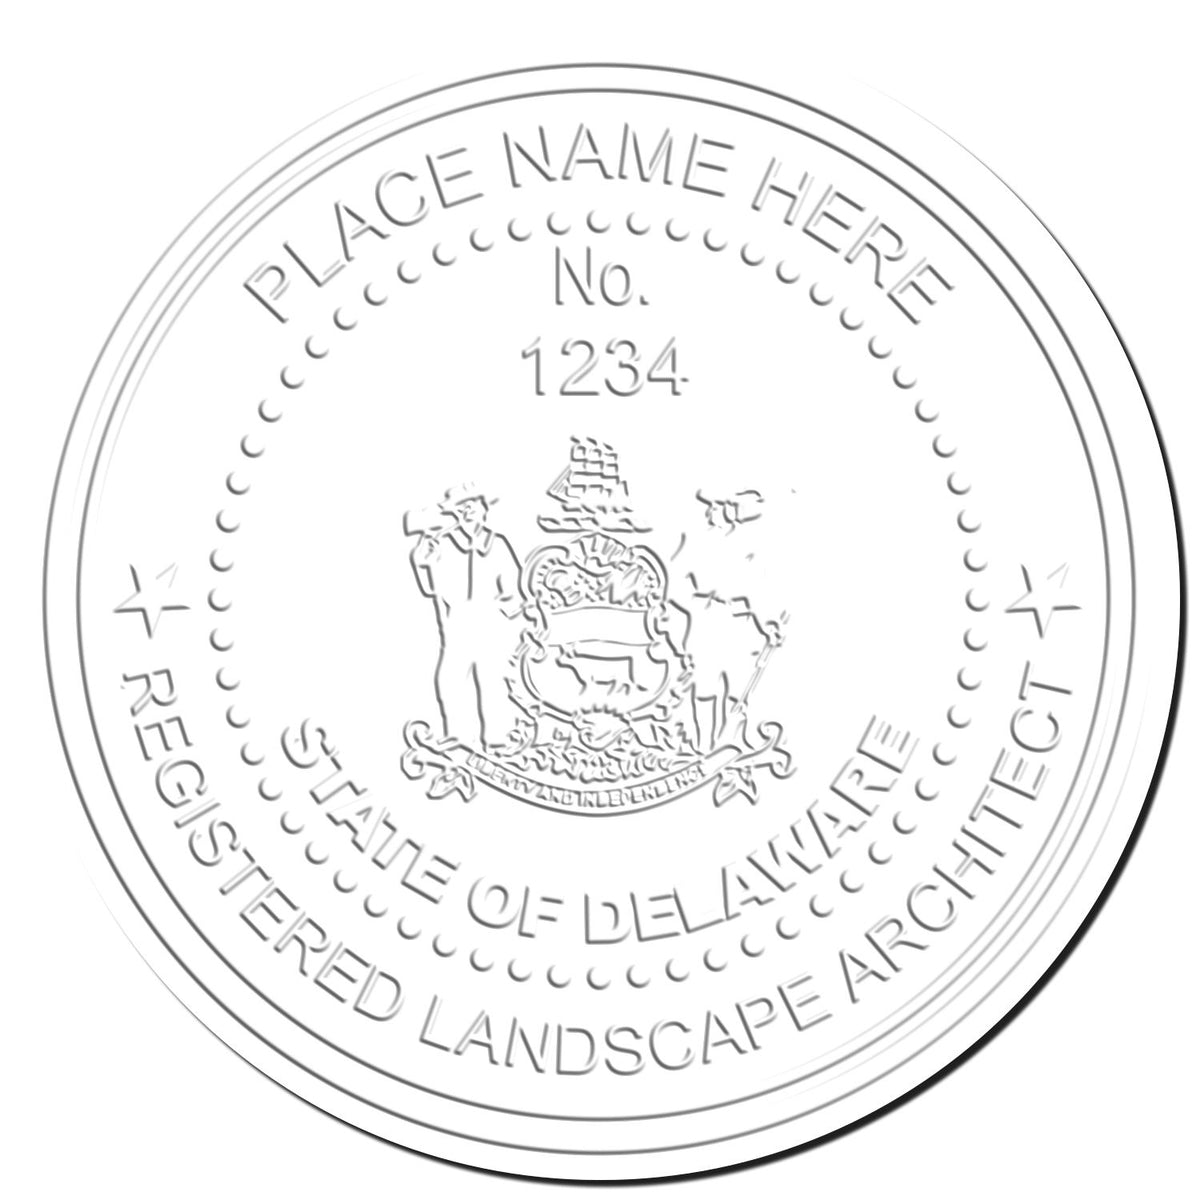 This paper is stamped with a sample imprint of the Gift Delaware Landscape Architect Seal, signifying its quality and reliability.